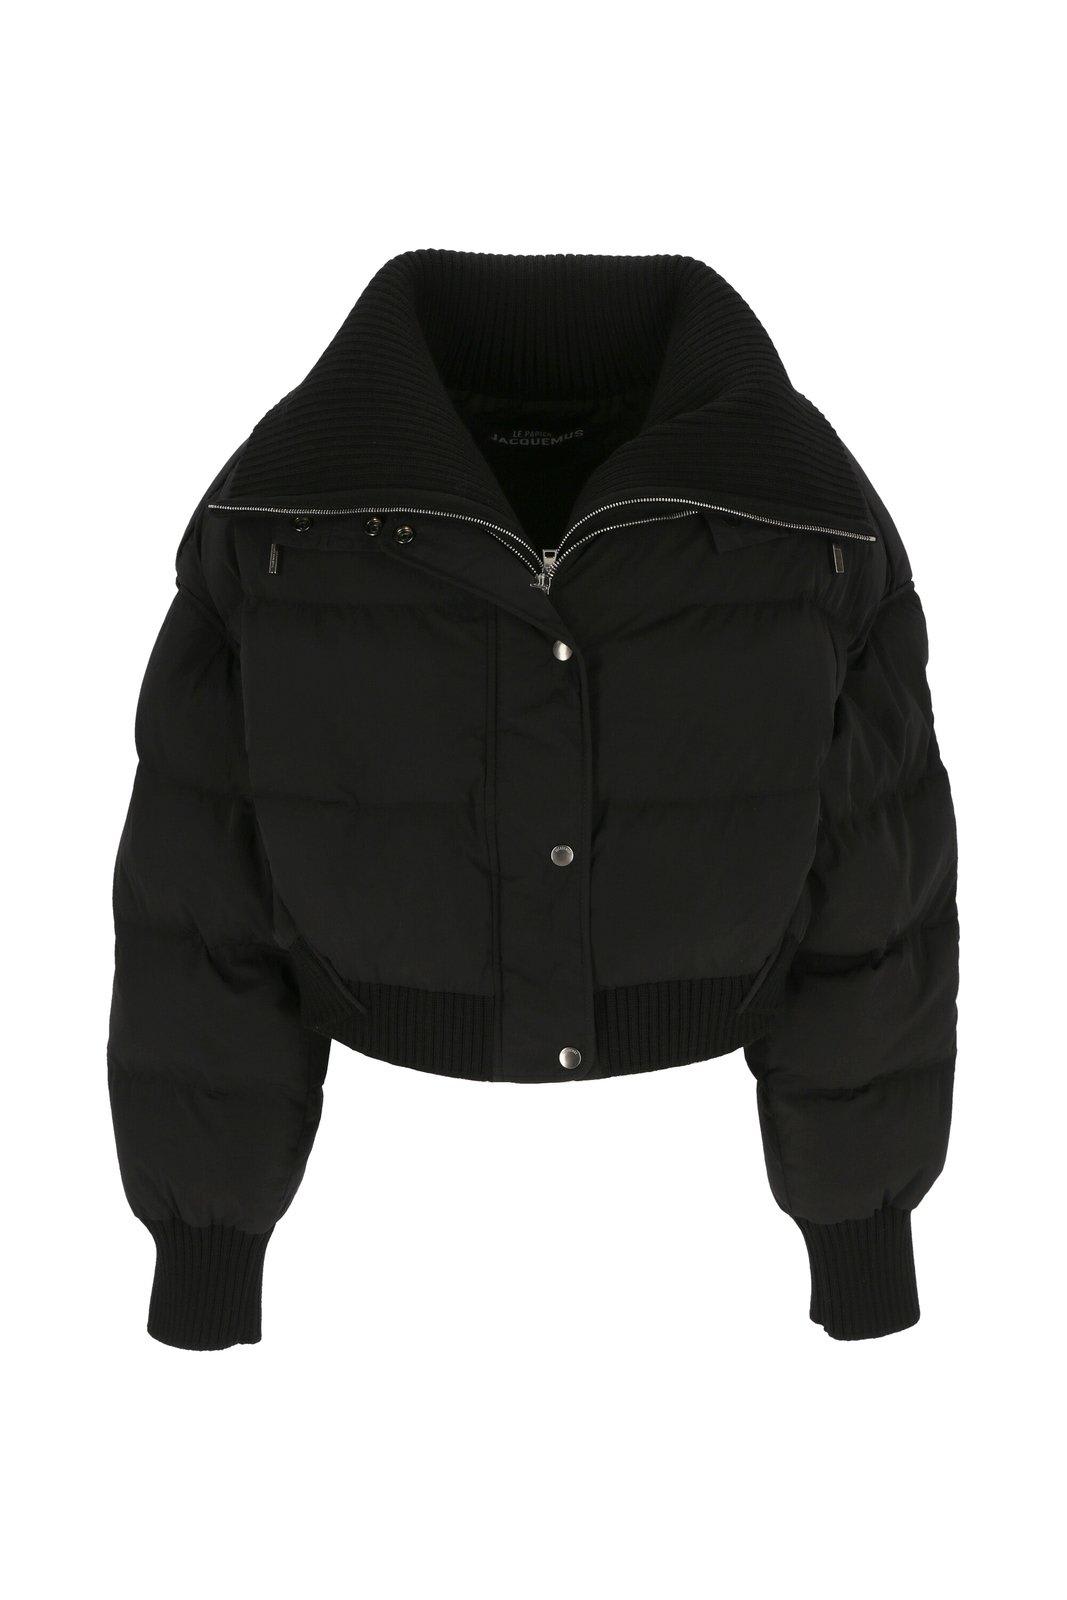 Jacquemus Padded Cropped Puffer Jacket